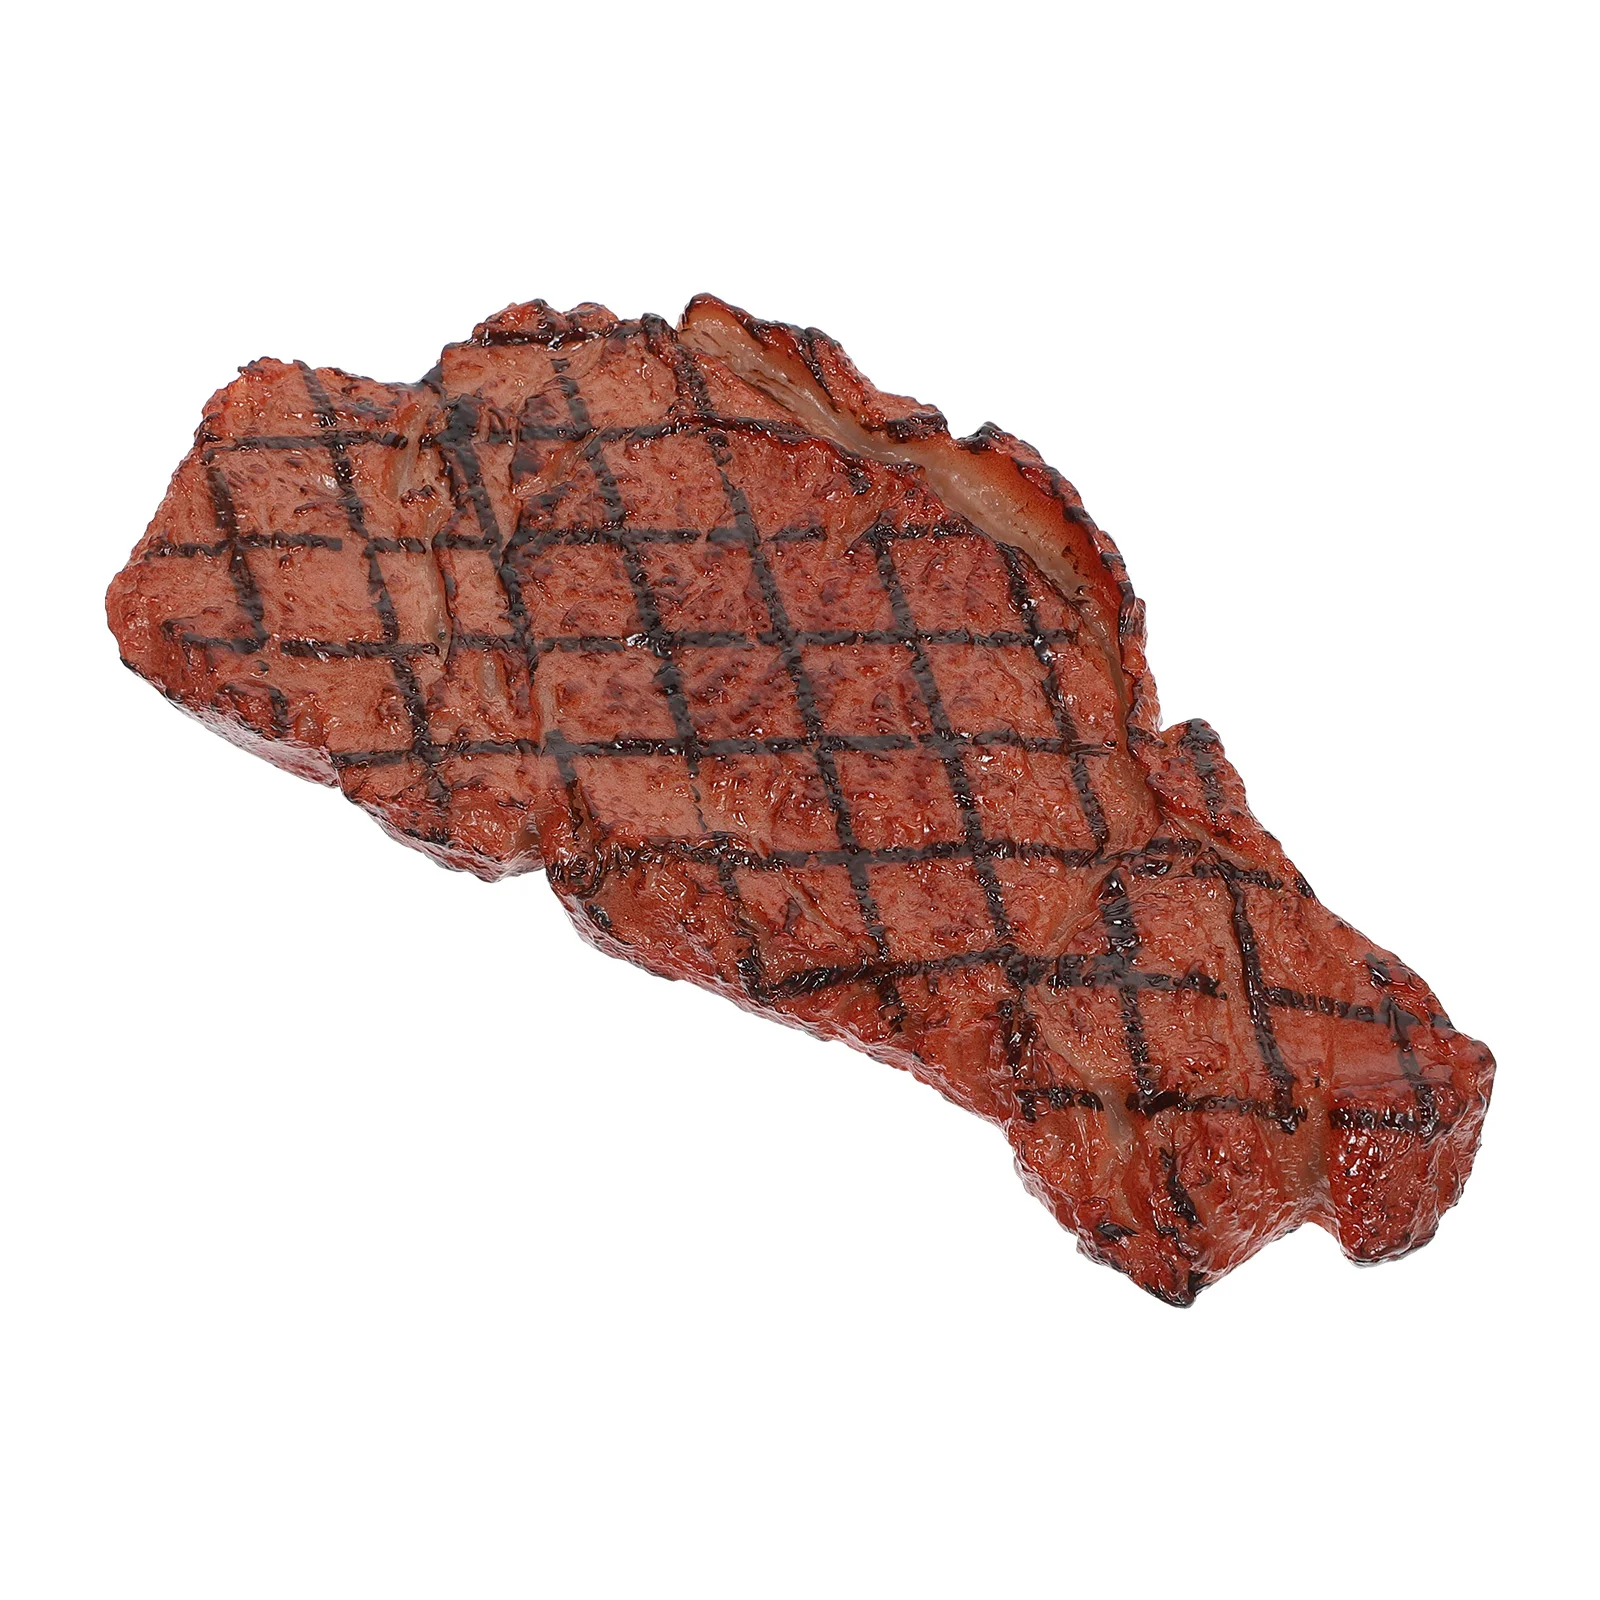 

Steak Toy Meat Beef Model Artificial Fake Simulation Roast Toys Pretend Cooked Lifelike Props Realistic Prop Playing Kid Kitchen